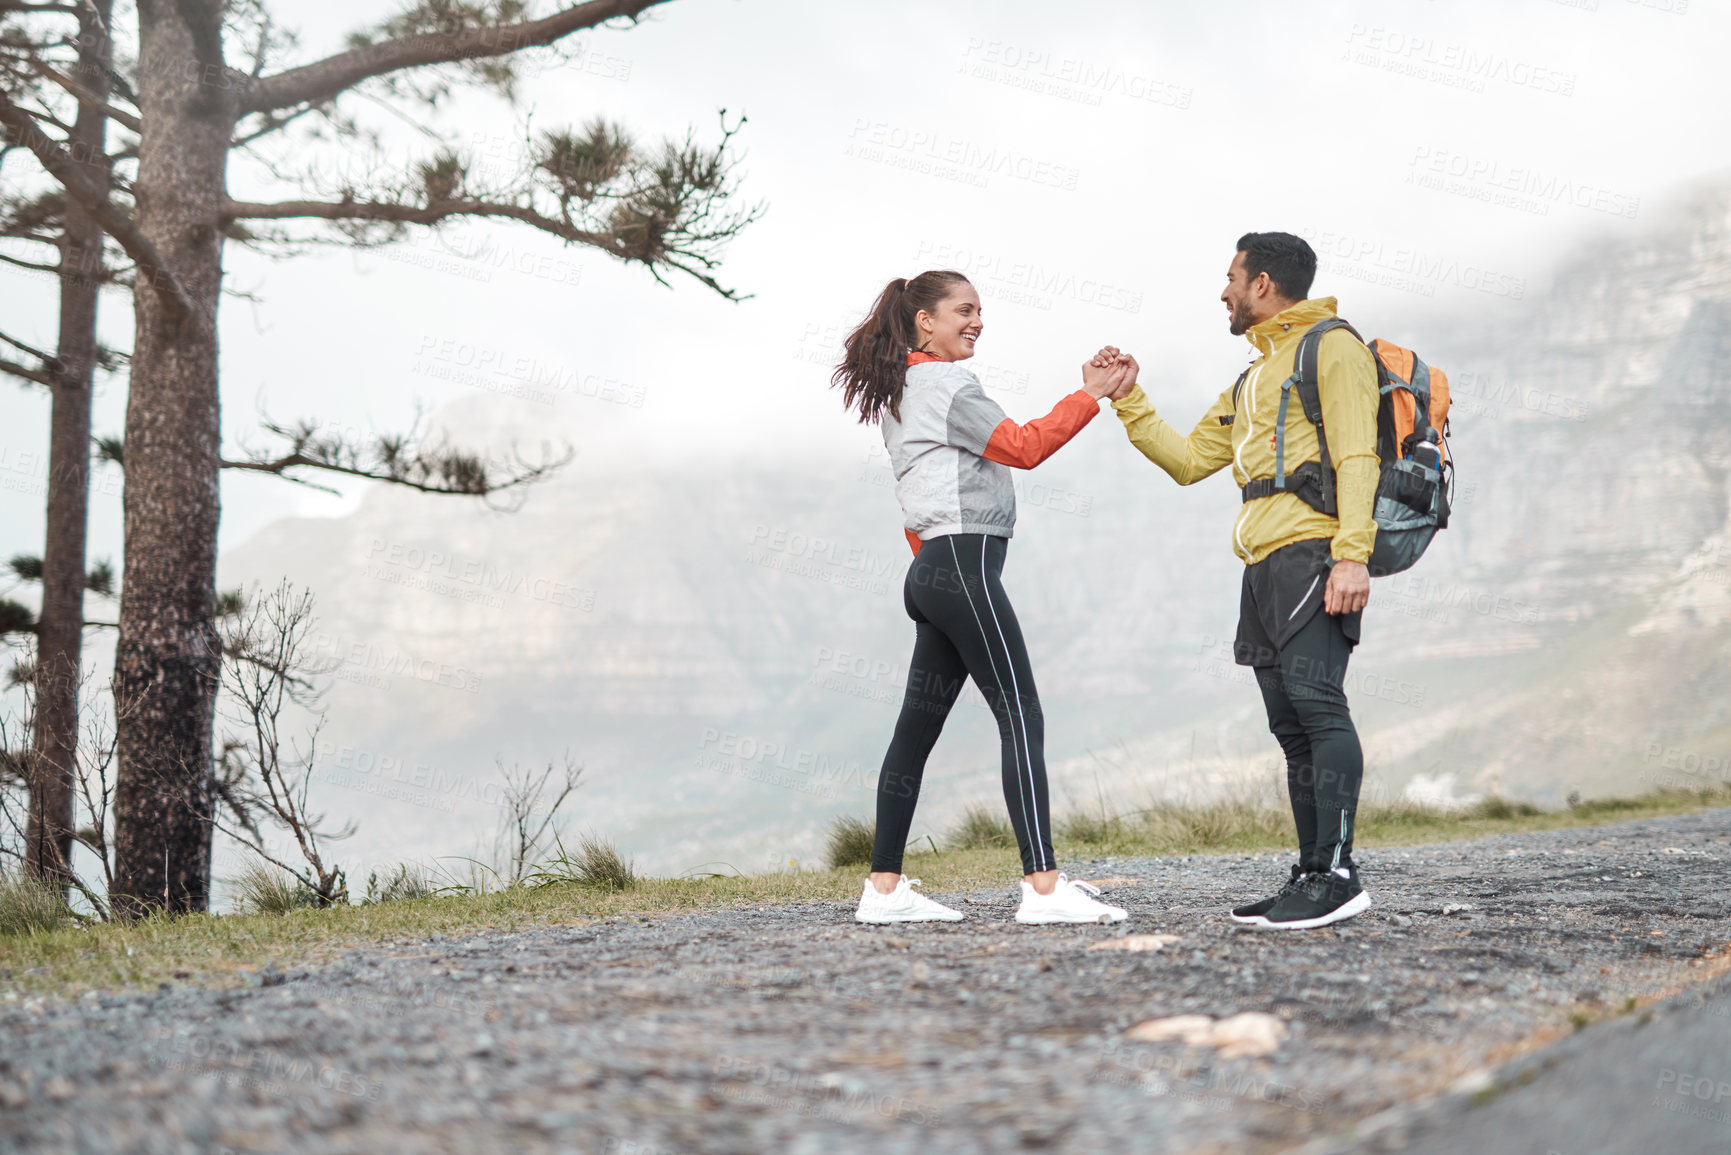 Buy stock photo Full length shot of two young athletes bonding during a hike outdoors